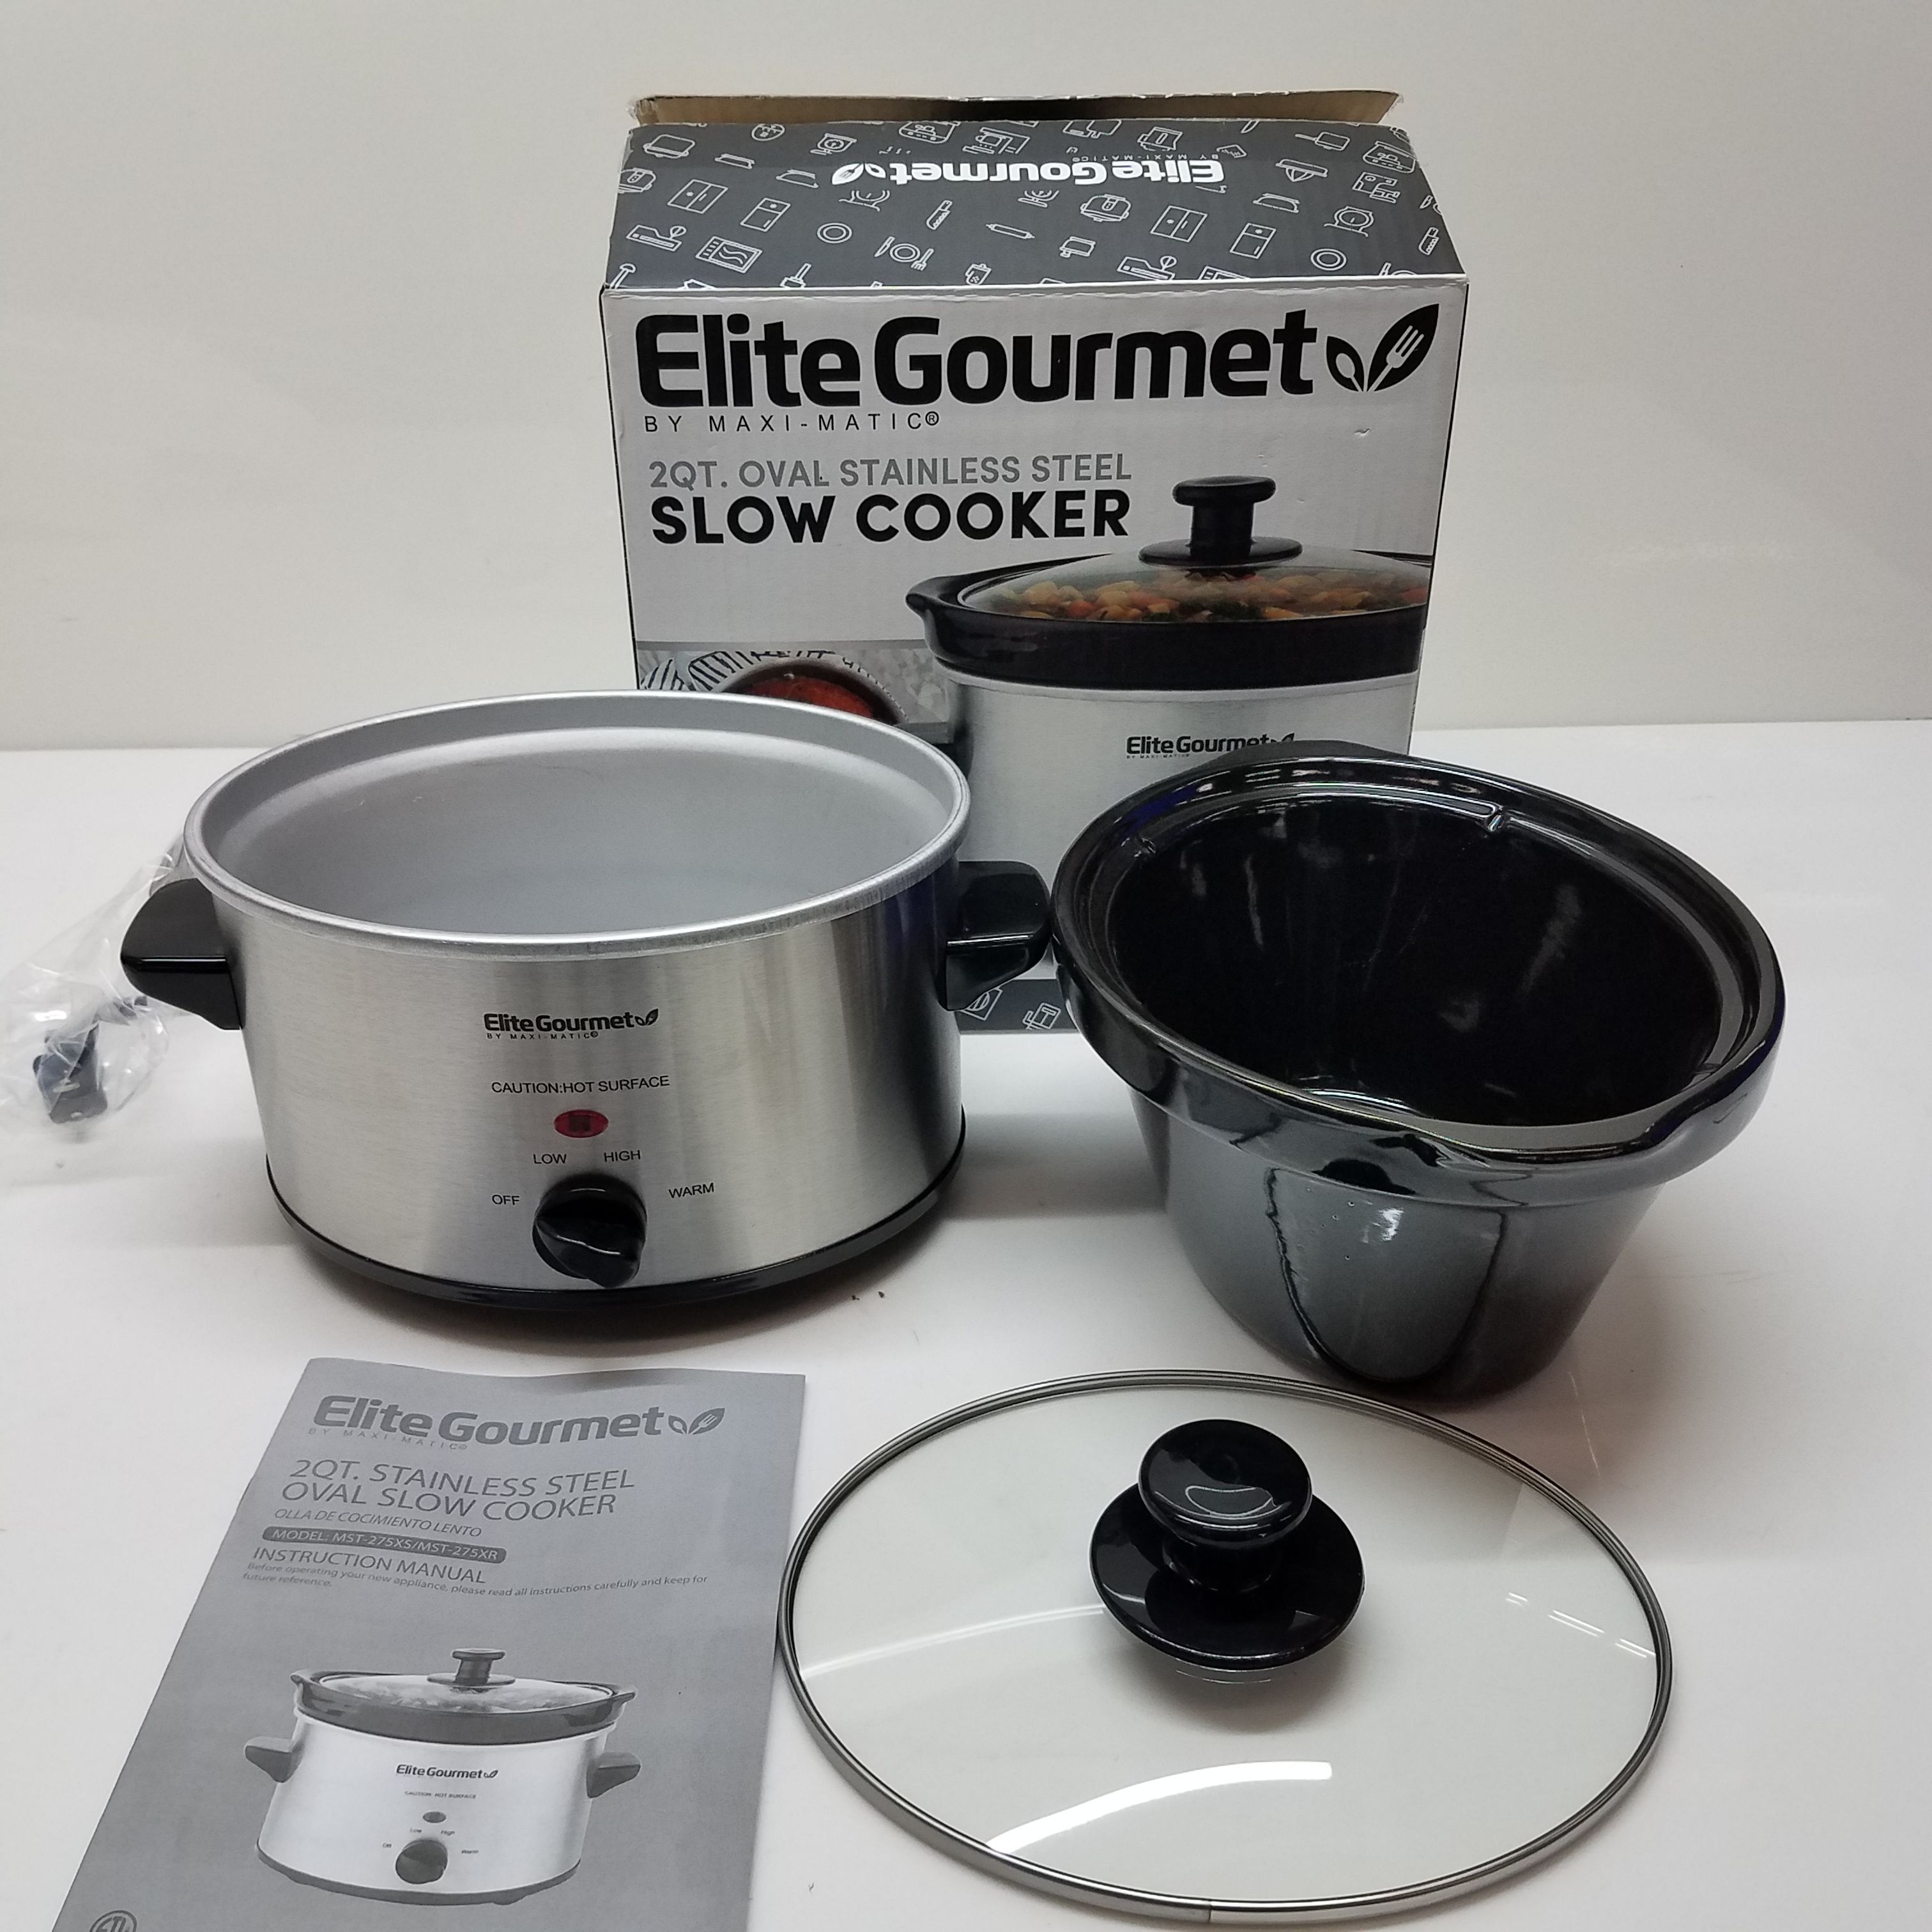 Buy the Elite Gourmet Maxi-Matic 2QT Oval Stainless Steel Slow